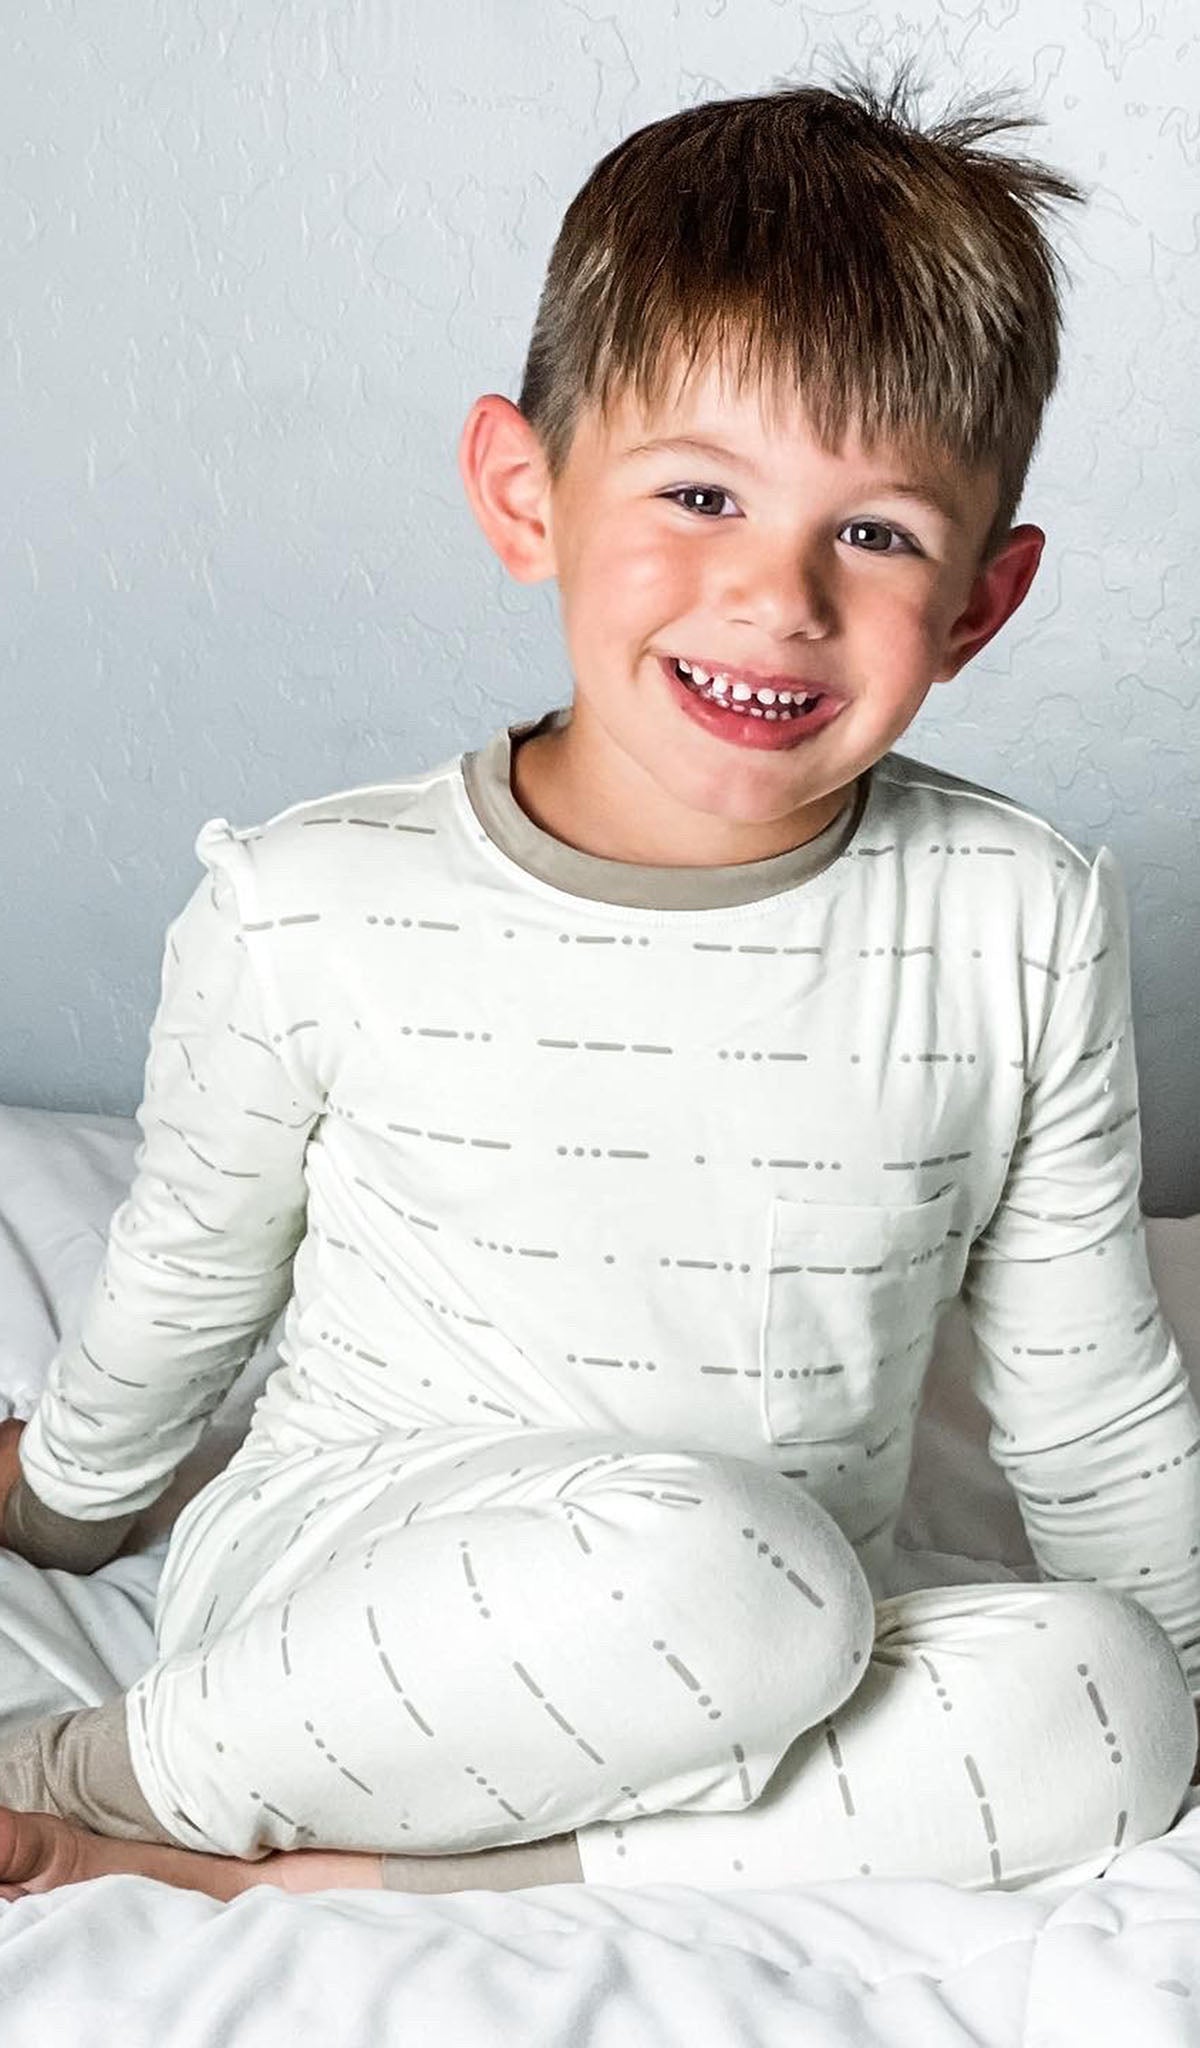 Love Emerson Kids 2-Piece Pant PJ worn by little boy sitting on his bed.